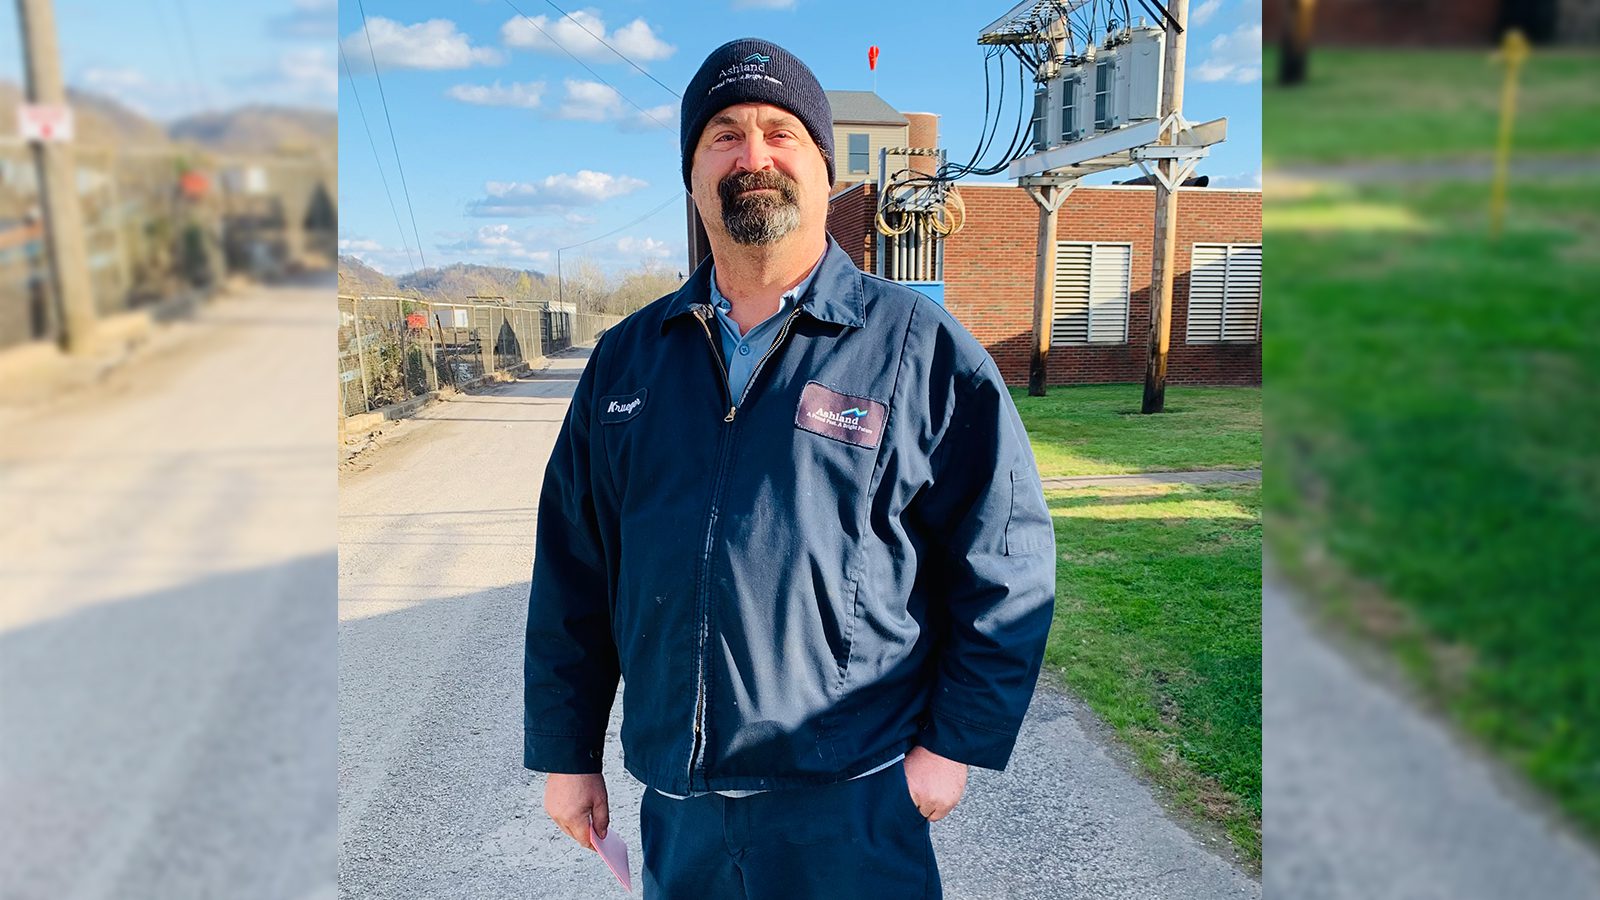 Featured image for “Unsung Heroes: David Krueger and the City of Ashland Wastewater Plant Team”